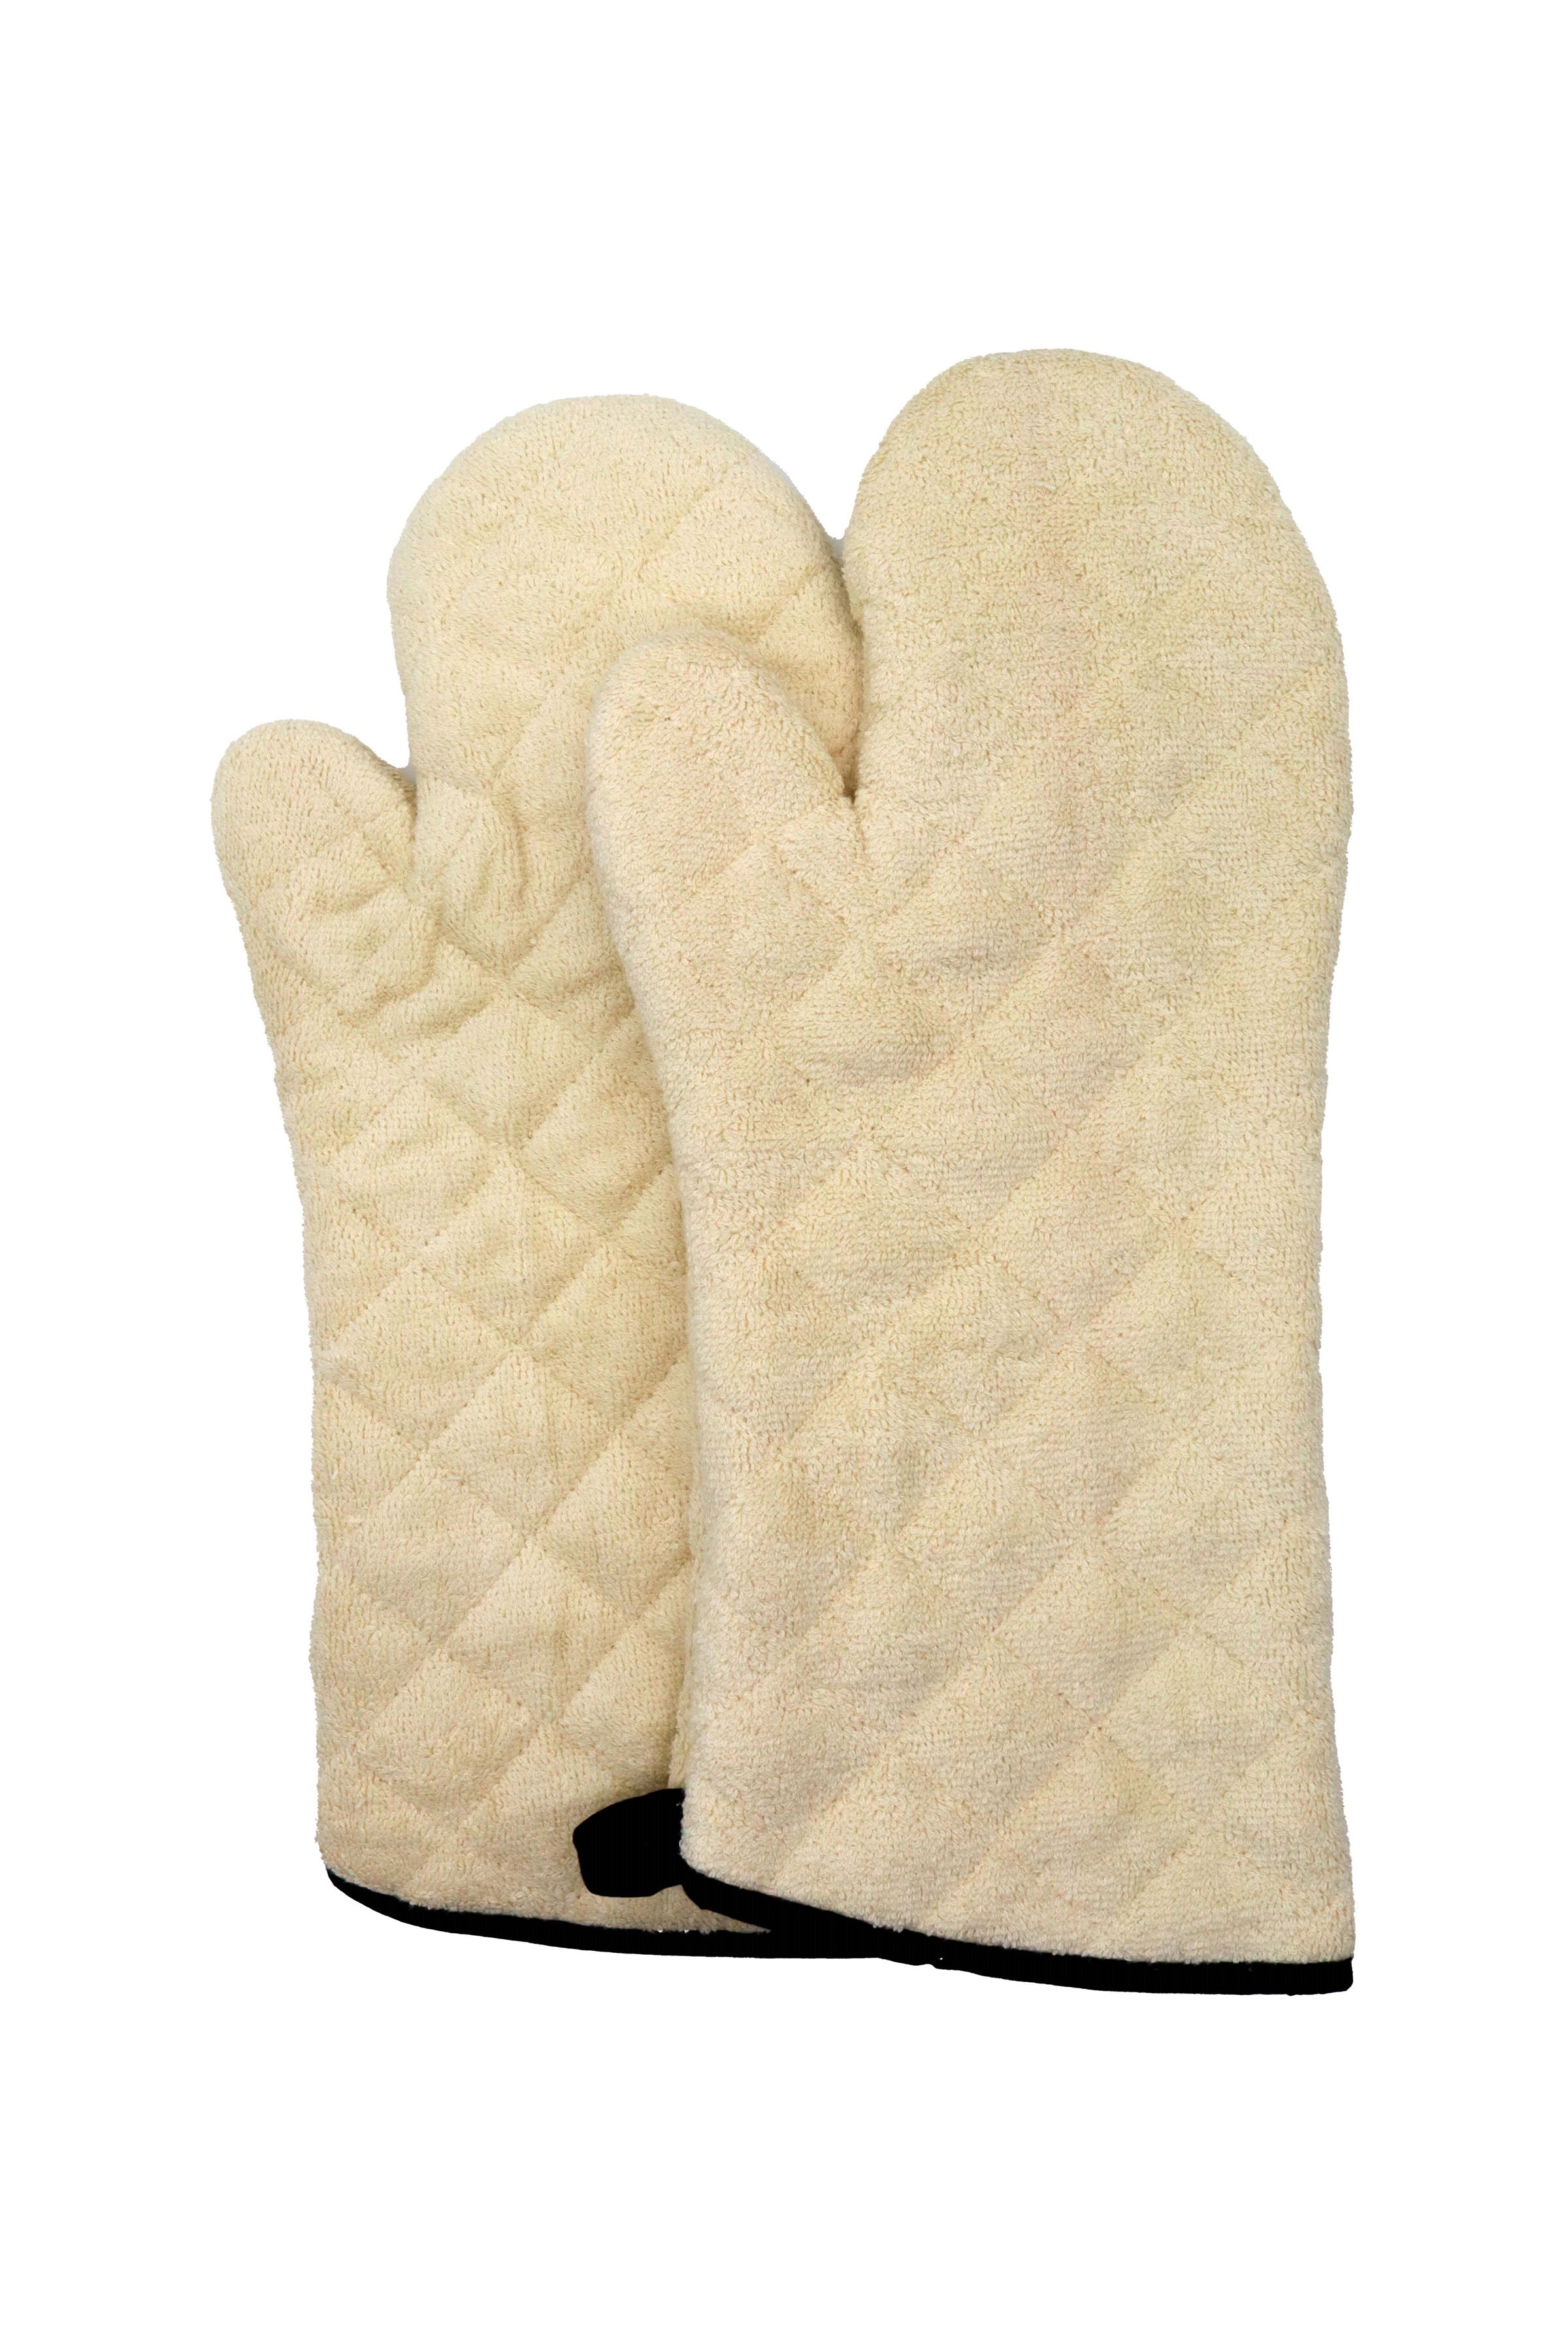 6 pcs, 3 pairs Terry Cloth Mitts 13 Industrial Oven Mitts for Heat Care, 1  unit - Kroger